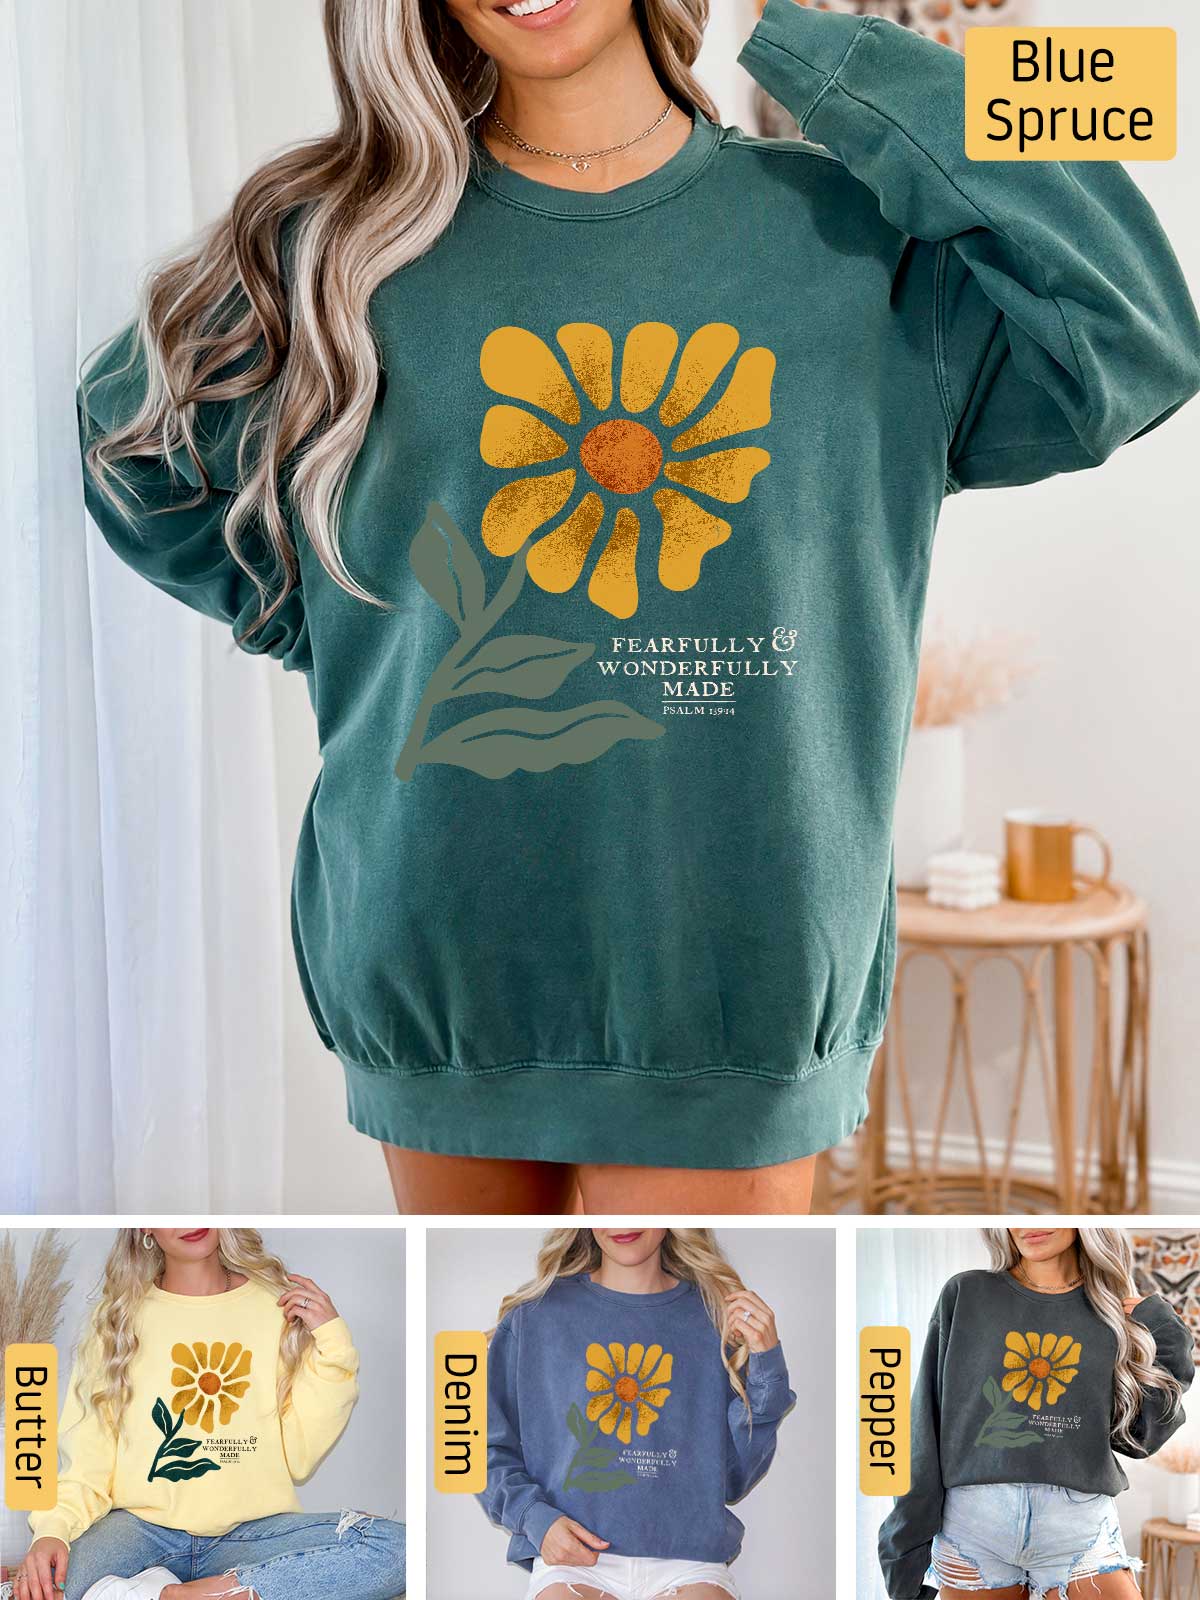 a woman wearing a green sweatshirt with a yellow flower on it